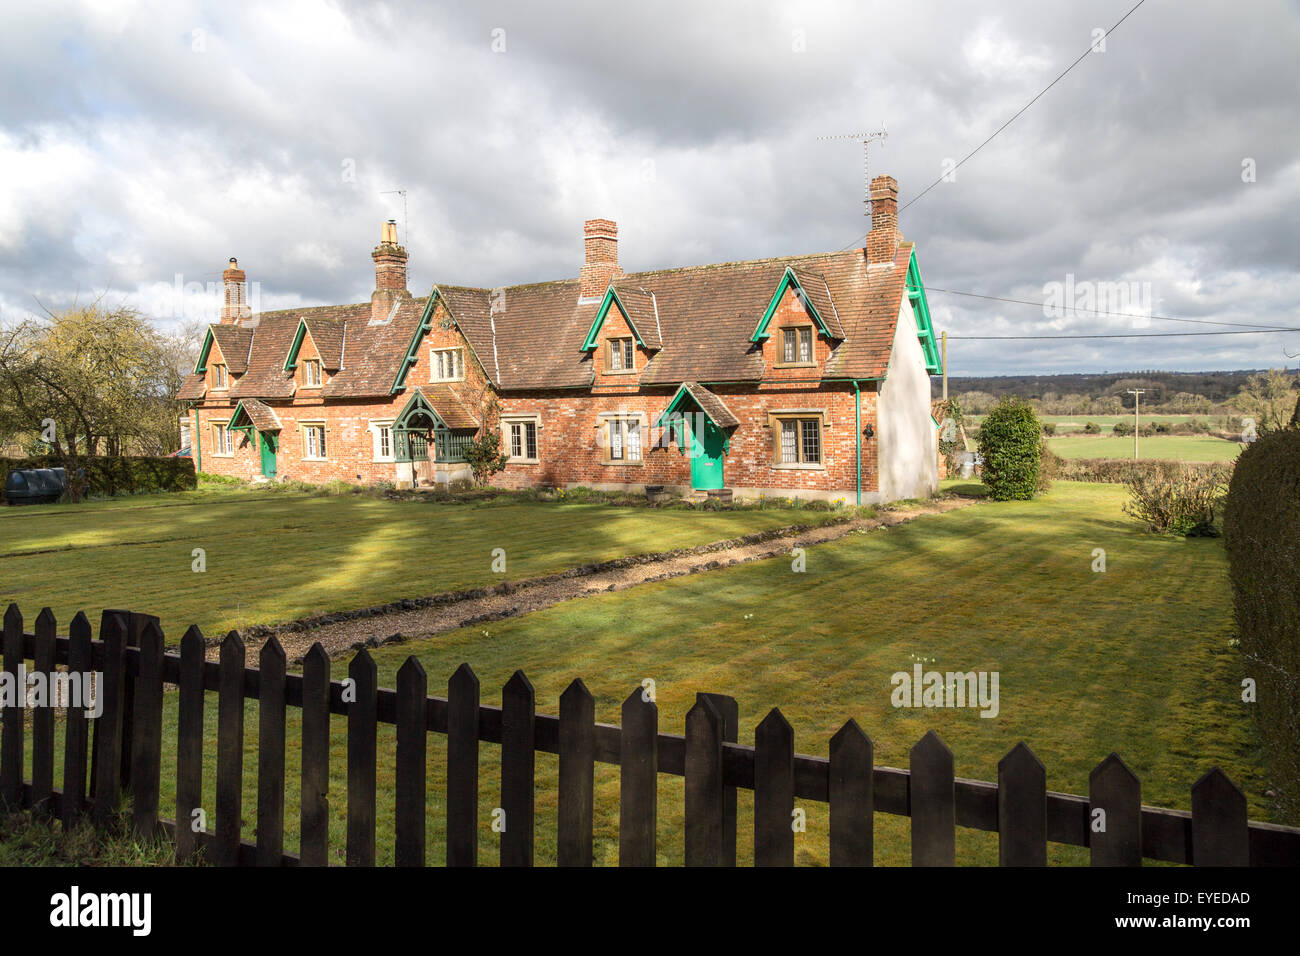 Traditional row of rural cottages in small terrace, Compton Bassett, Wiltshire, England, UK Stock Photo